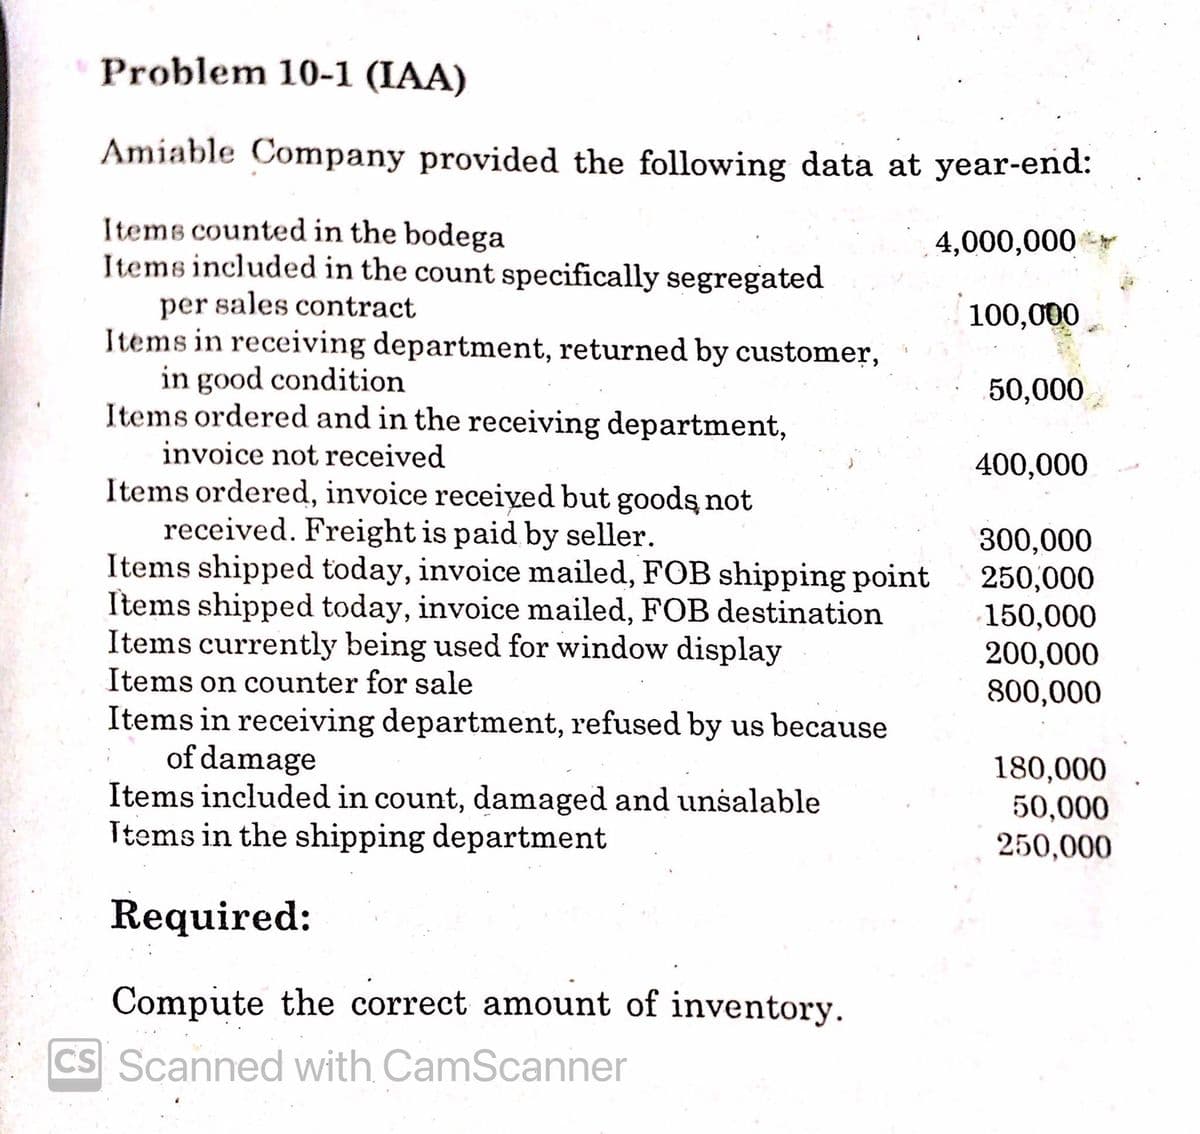 Problem 10-1 (IAA)
Amiable Company provided the following data at year-end:
Items counted in the bodega
Items included in the count specifically segregated
per sales contract
Items in receiving department, returned by customer,
in good condition
Items ordered and in the receiving department,
4,000,000
100,000
50,000
invoice not received
400,000
Items ordered, invoice receiyed but goodş not
received. Freight is paid by seller.
Items shipped today, invoice mailed, FOB shipping point
Items shipped today, invoice mailed, FOB destination
Items currently being used for window display
Items on counter for sale
300,000
250,000
150,000
200,000
800,000
Items in receiving department, refused by us because
of damage
Items included in count, damaged and unsalable
Items in the shipping department
180,000
50,000
250,000
Required:
Compute the correct amount of inventory.
CS Scanned with CamScanner
